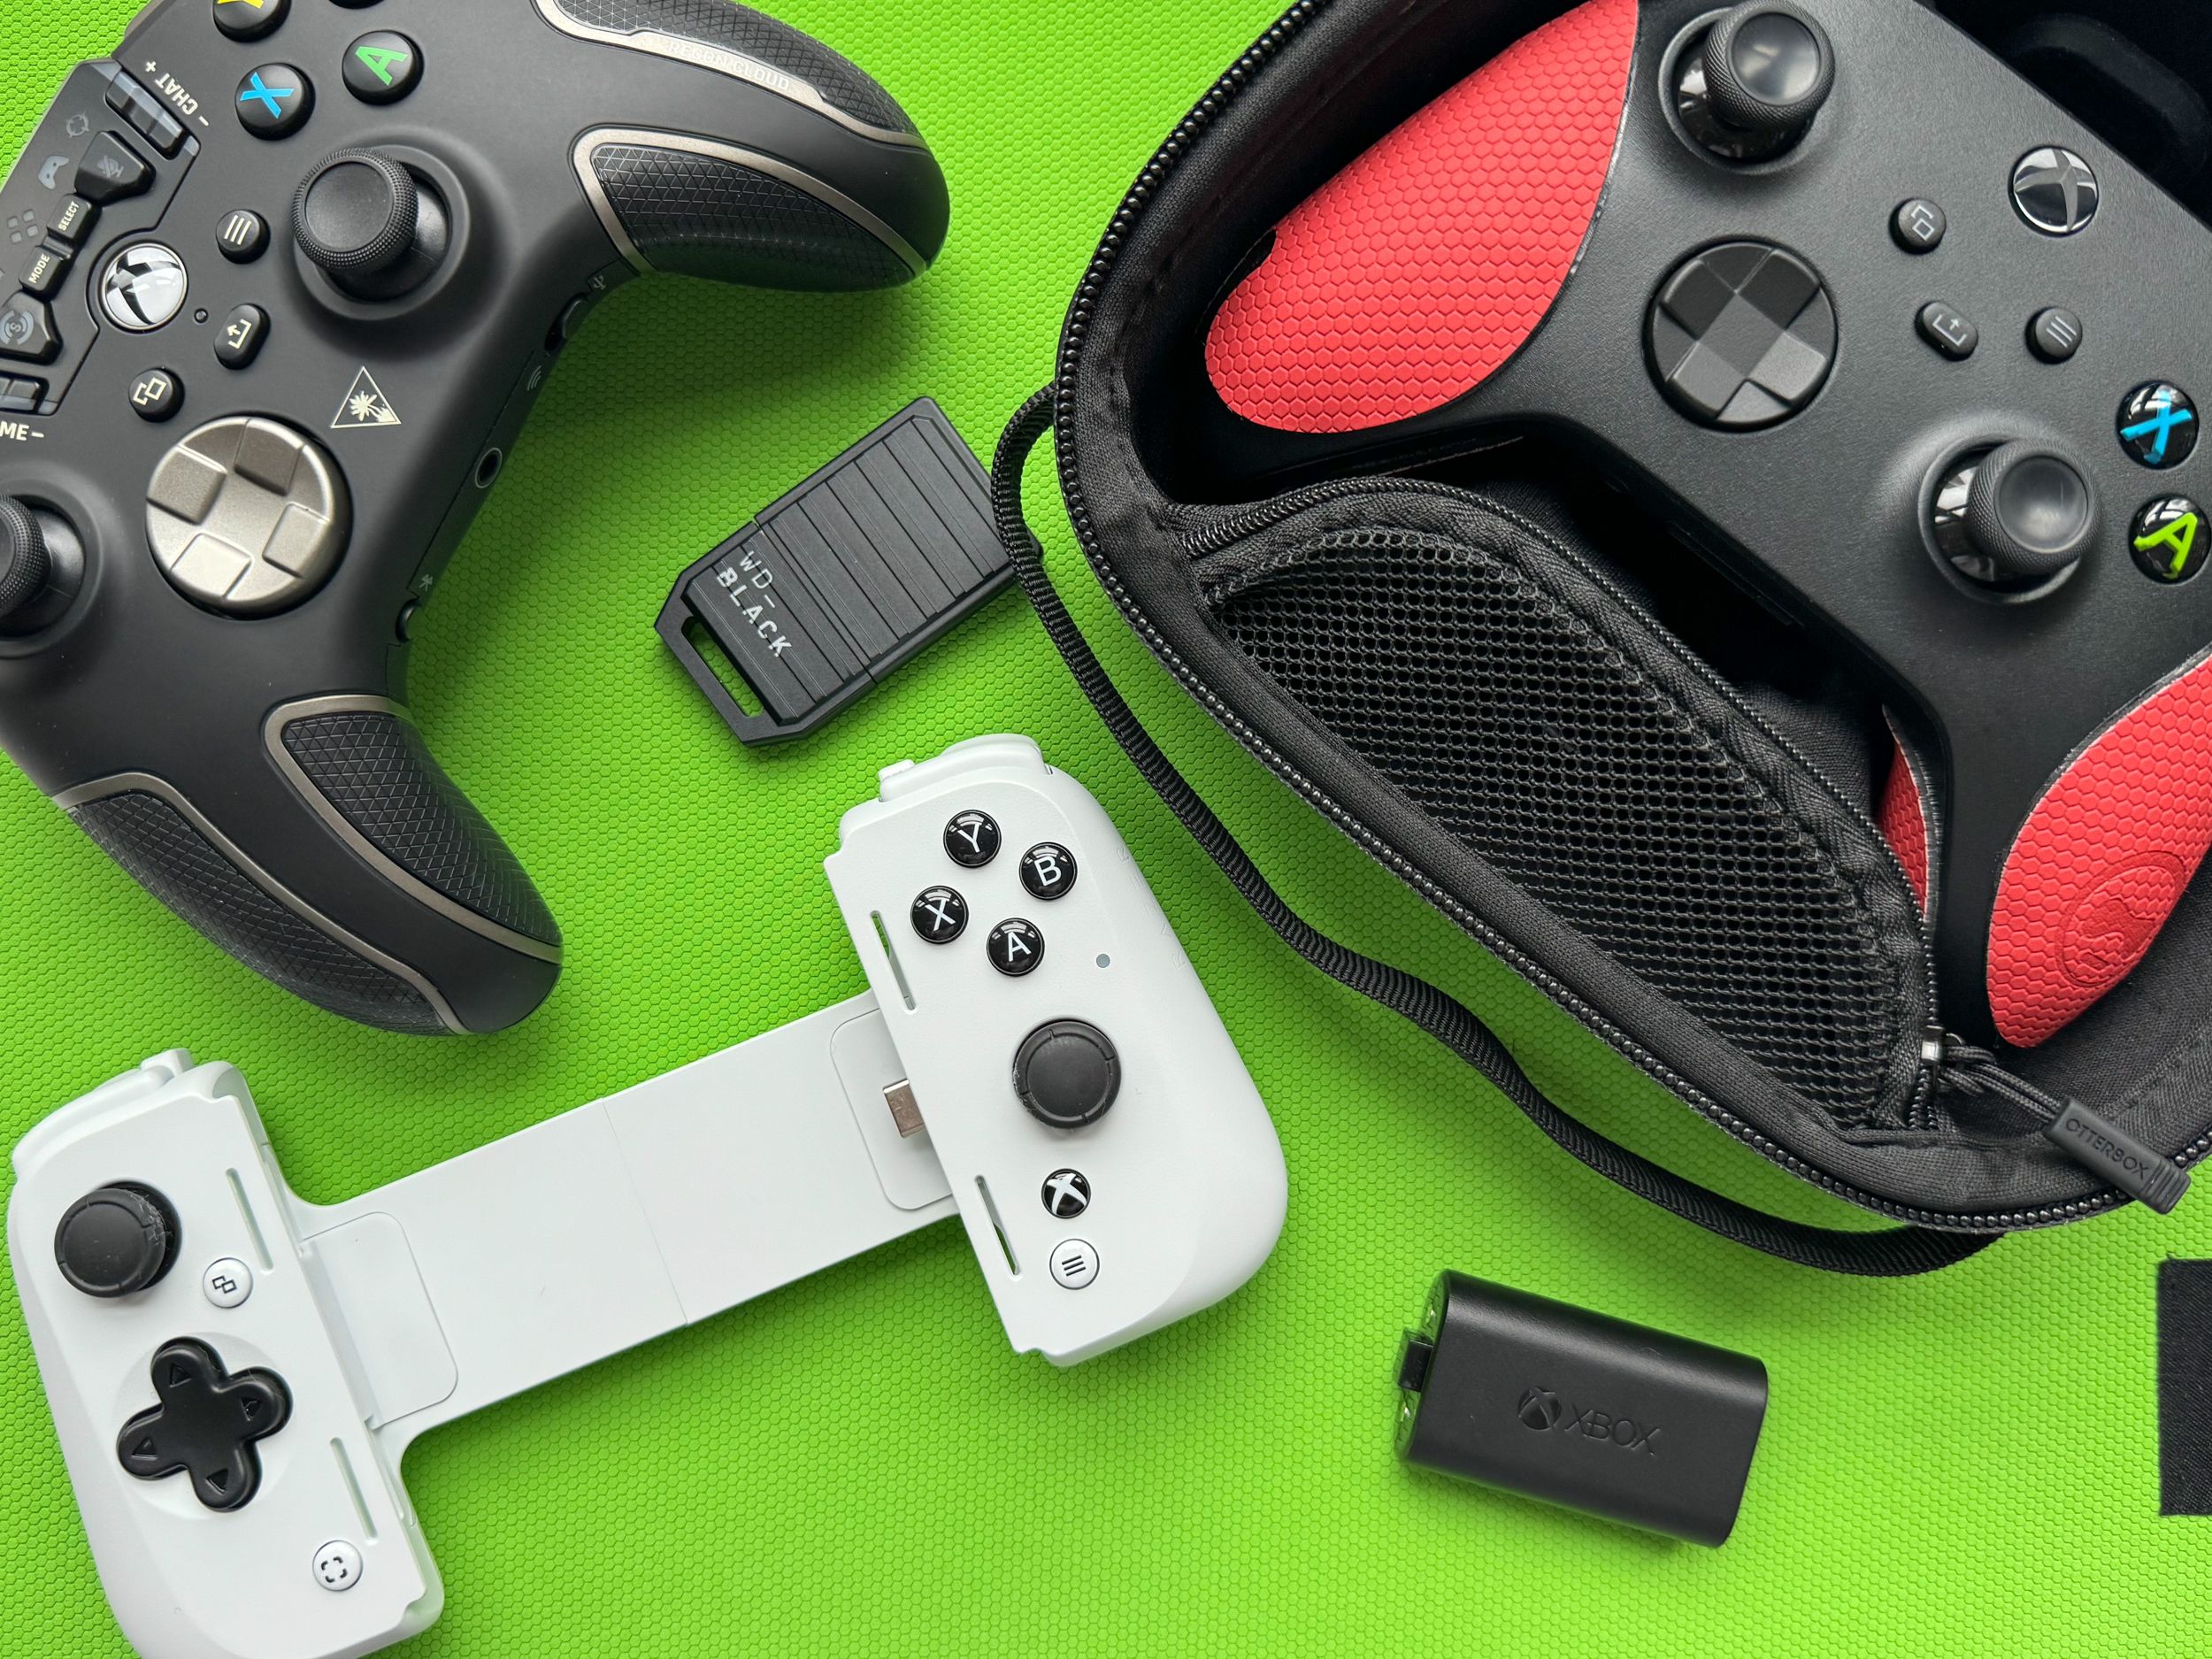 Introducing Our Launch Line-up of Next-gen Xbox Accessories